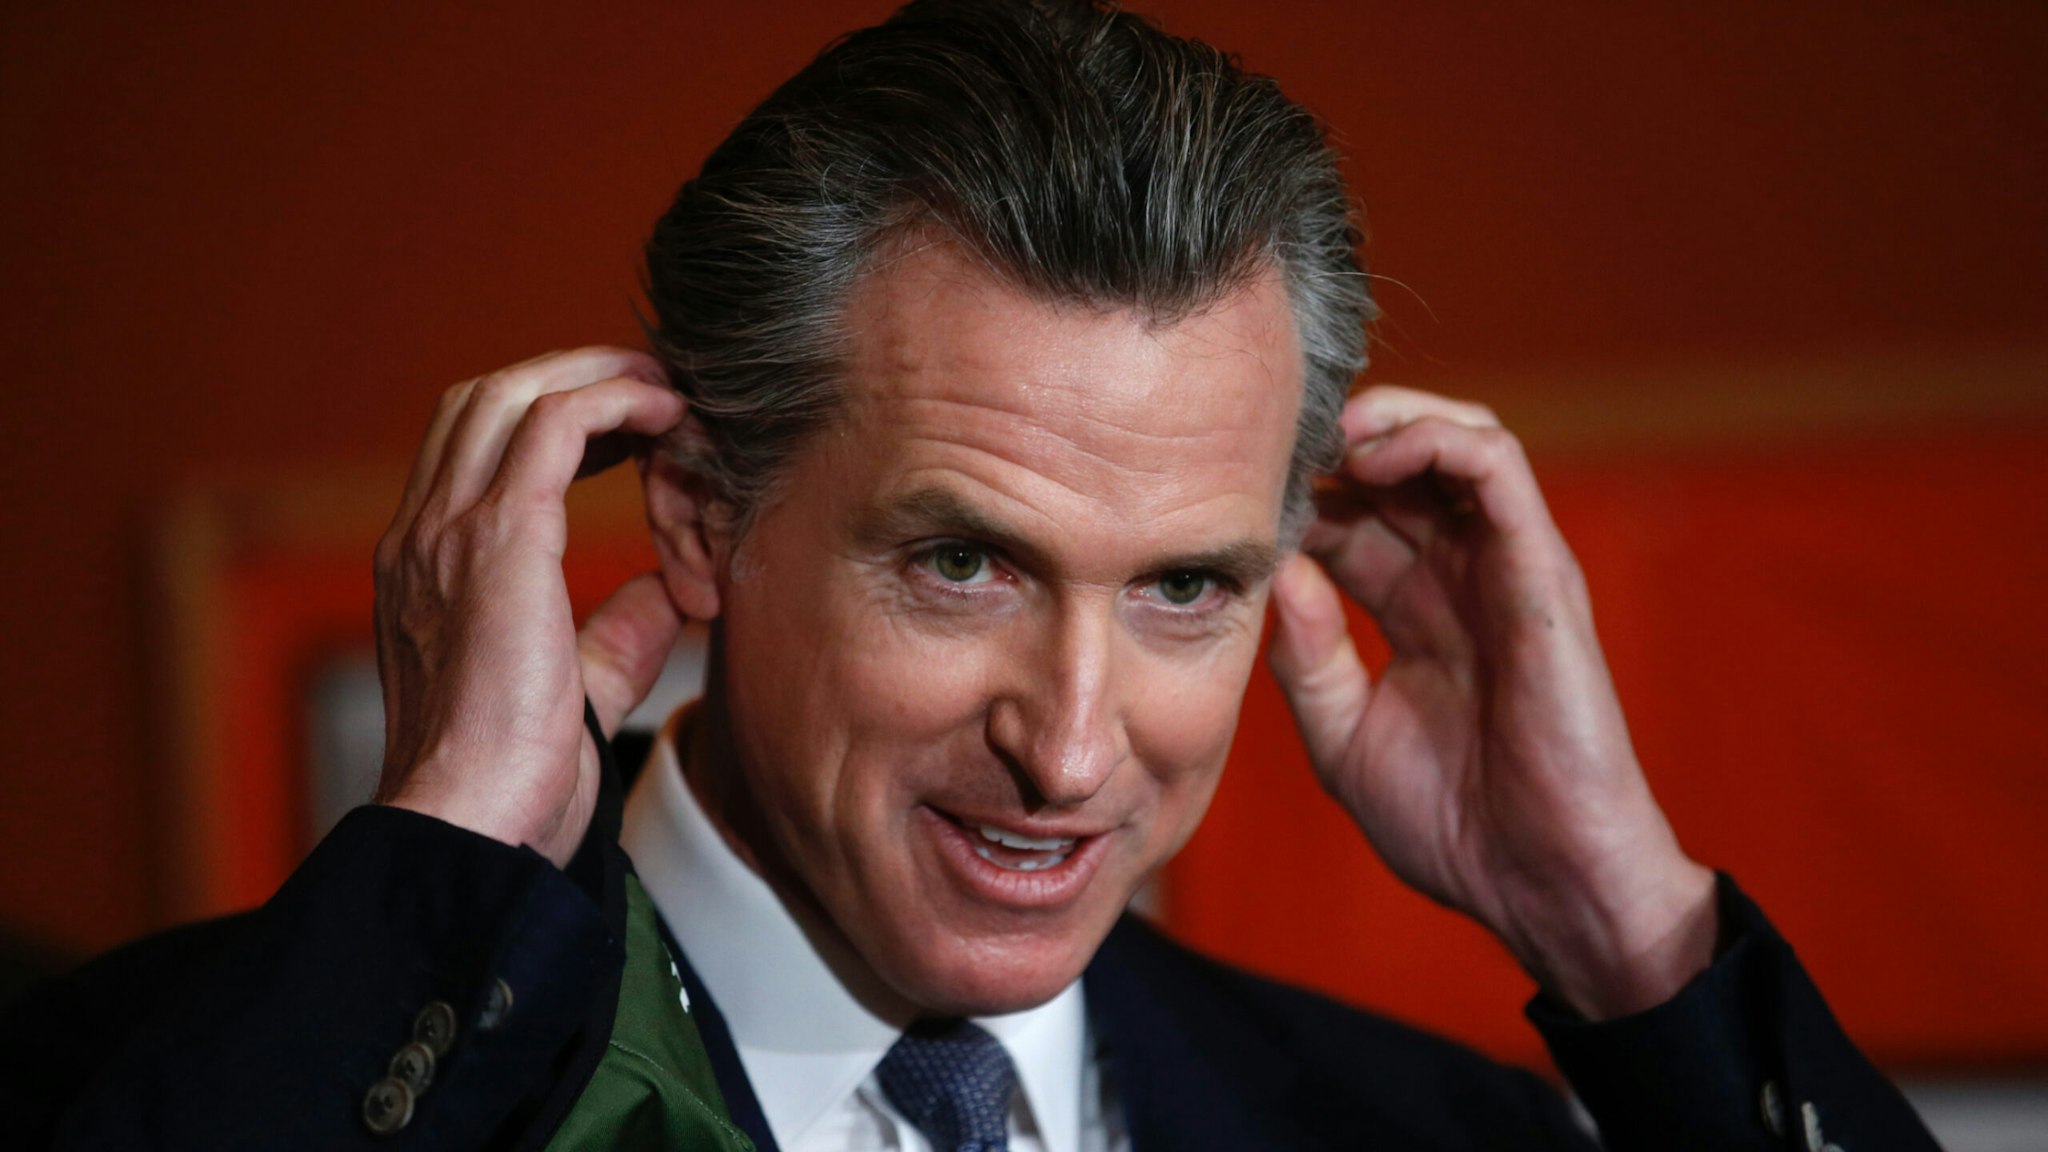 Gov. Gavin Newsom removes his mask before speaking during a press conference at at the Native American Health Center in Oakland, Calif., on Wednesday, Dec. 22, 2021.